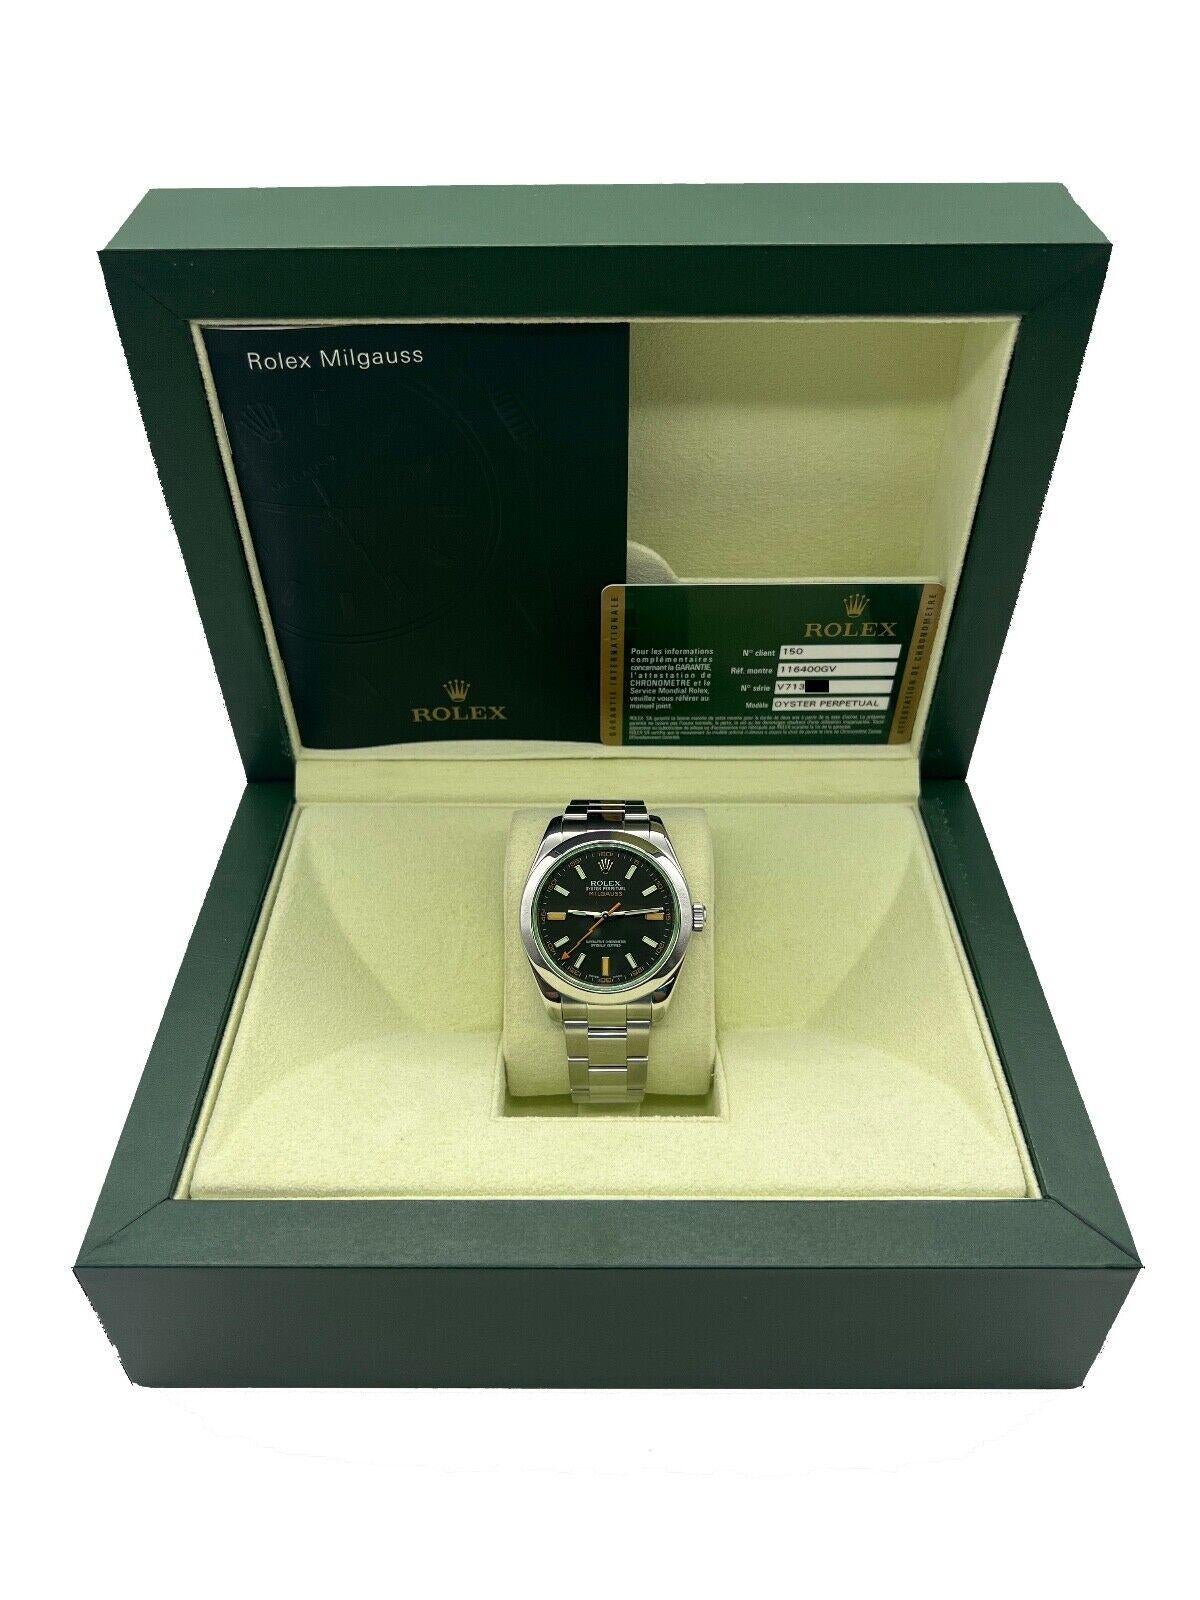 Rolex Milgauss 116400GV Black Dial Green Crystal Stainless Steel Box Paper 3